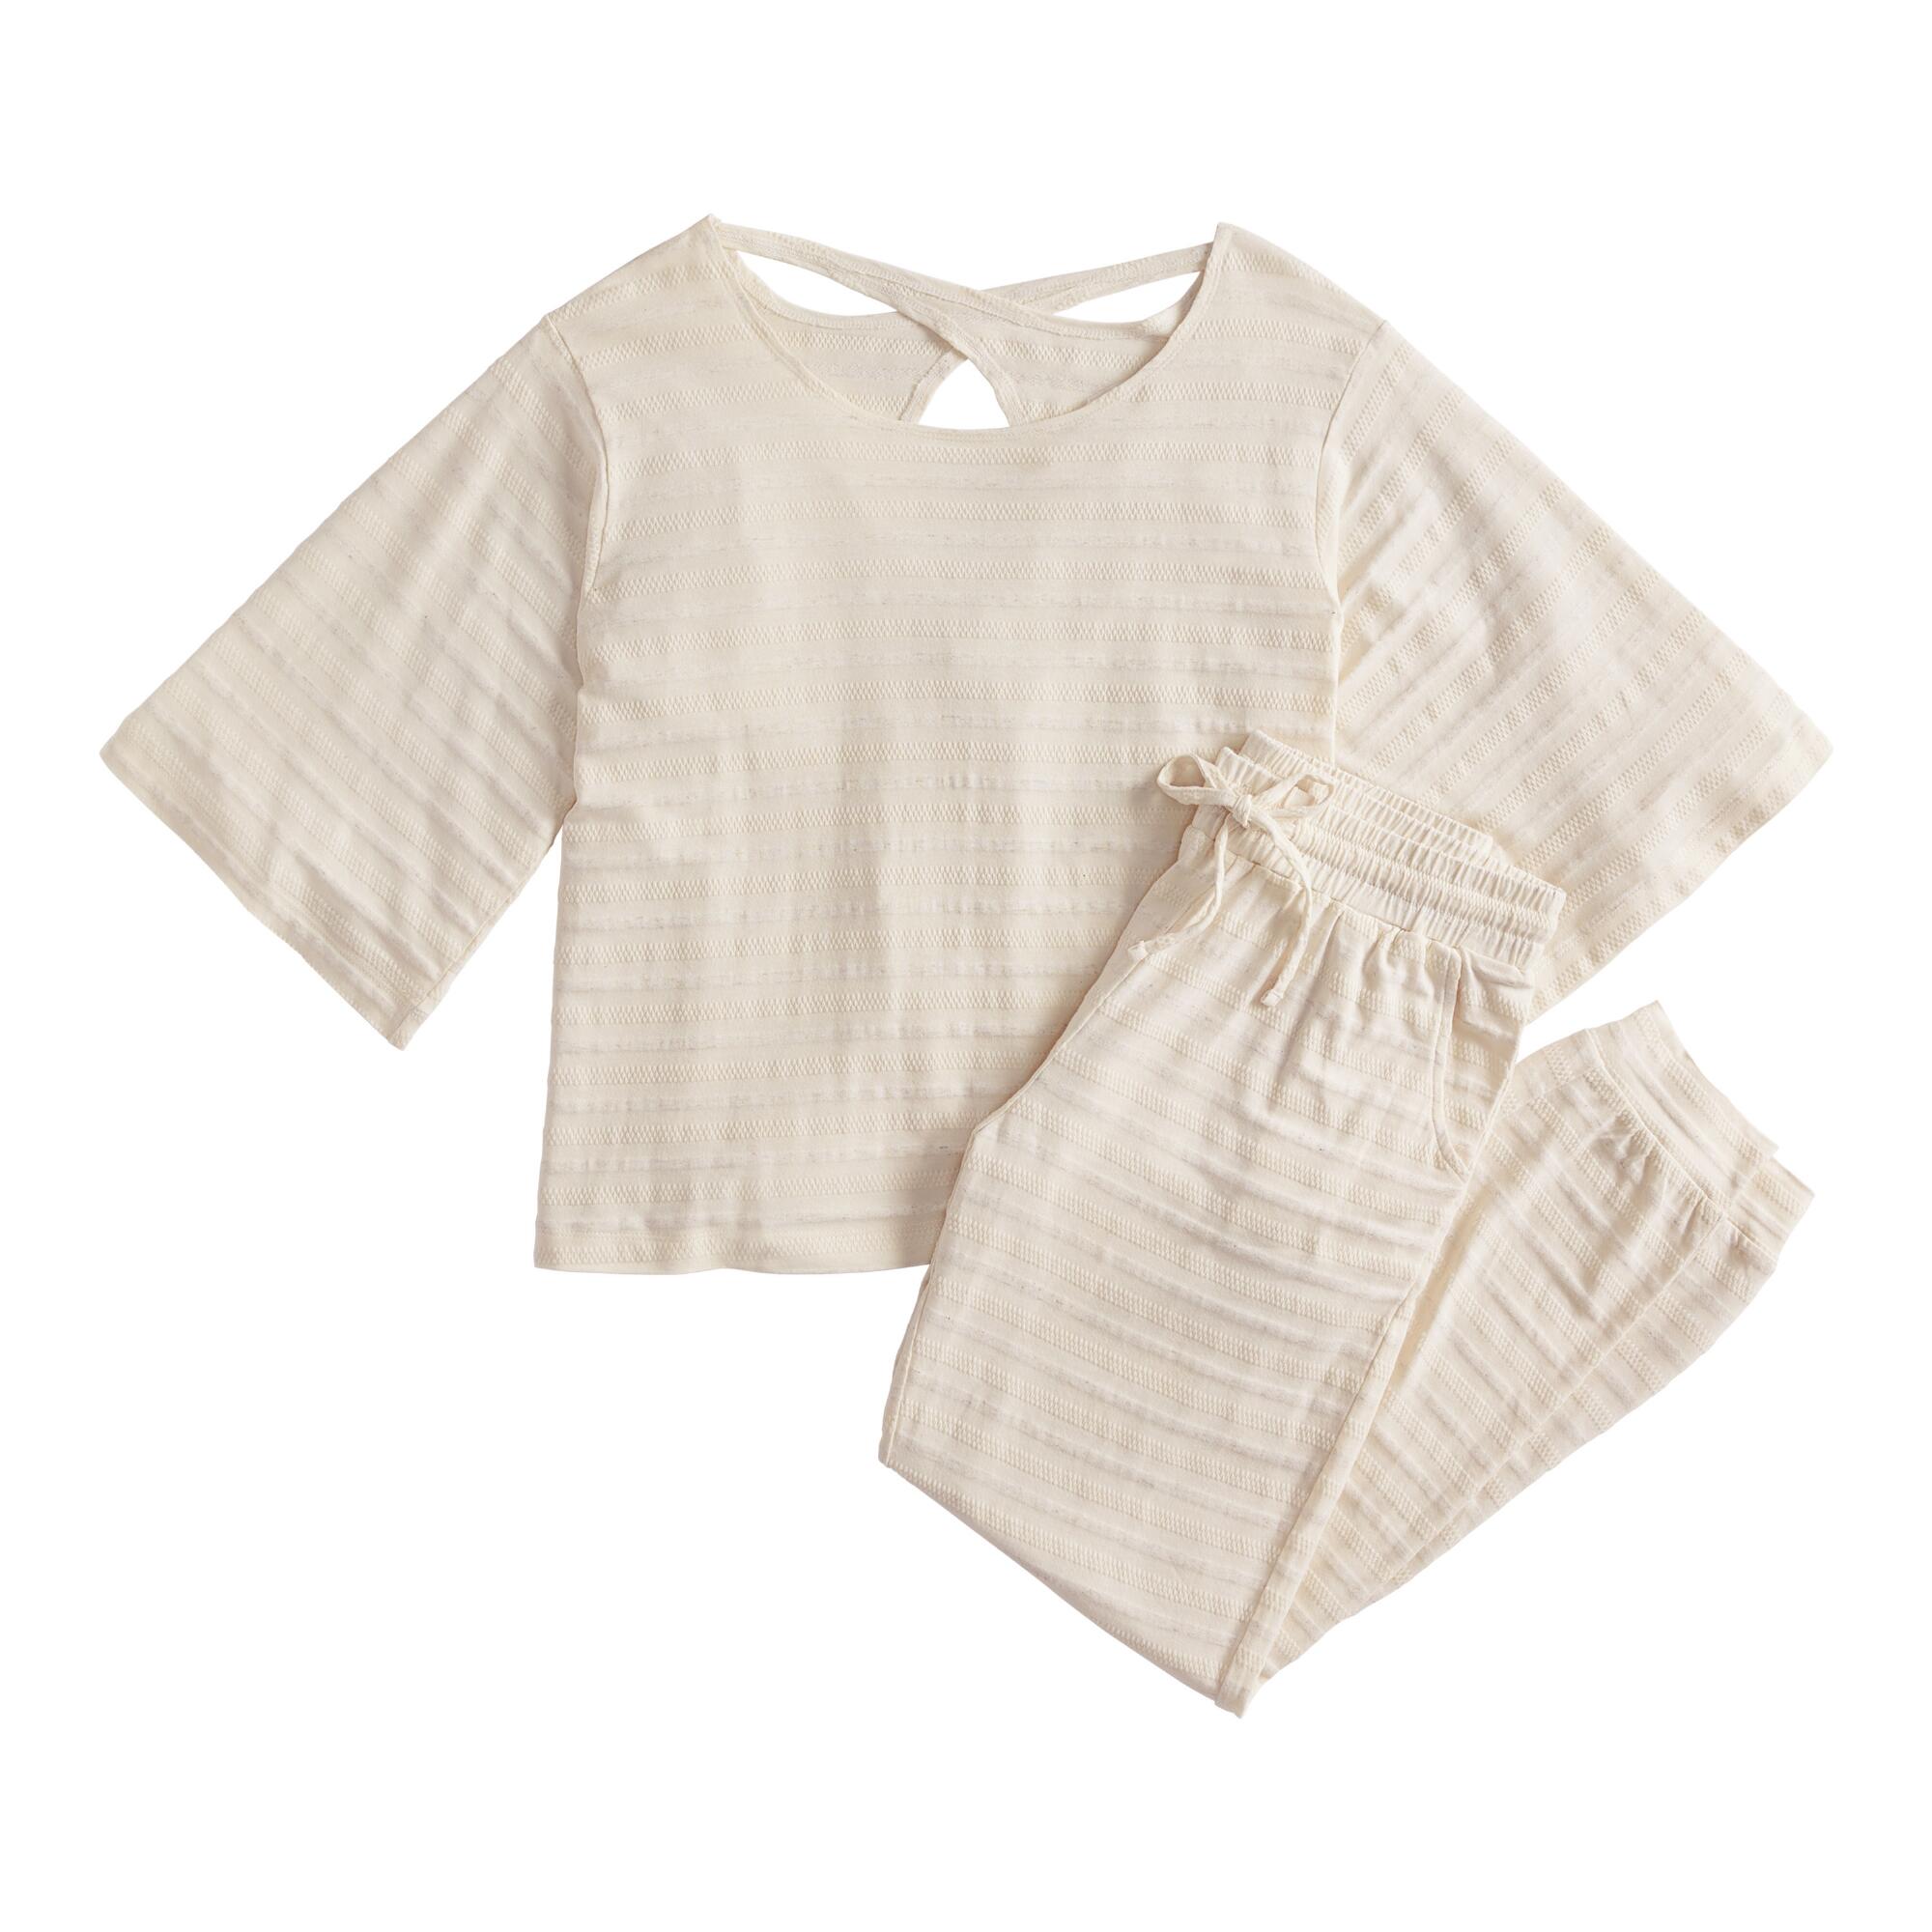 Ivory Textured Stripe Loungewear Collection by World Market